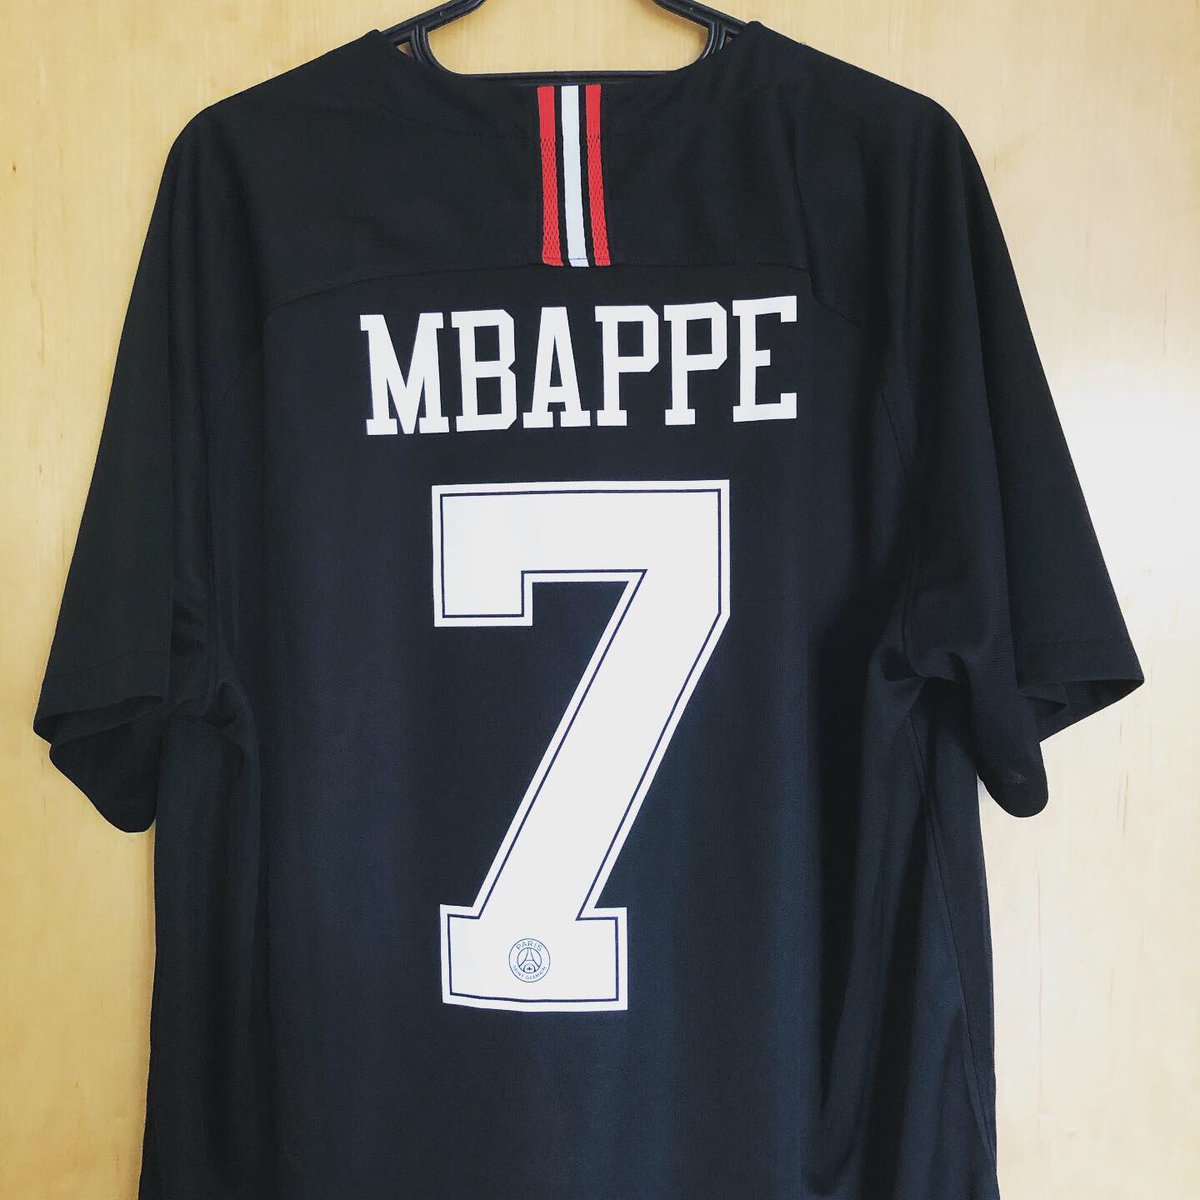 . @PSG_English Third Kit, 2018/19Air JordanPersonalised:  @KMbappe 7Another jersey from a city I’ve lived in, this kit inaugurated the collab between  #AirJordan and  #PSG. Also, I’m a sucker for black football topsSported for a wonderful walk in the Dolomites last week